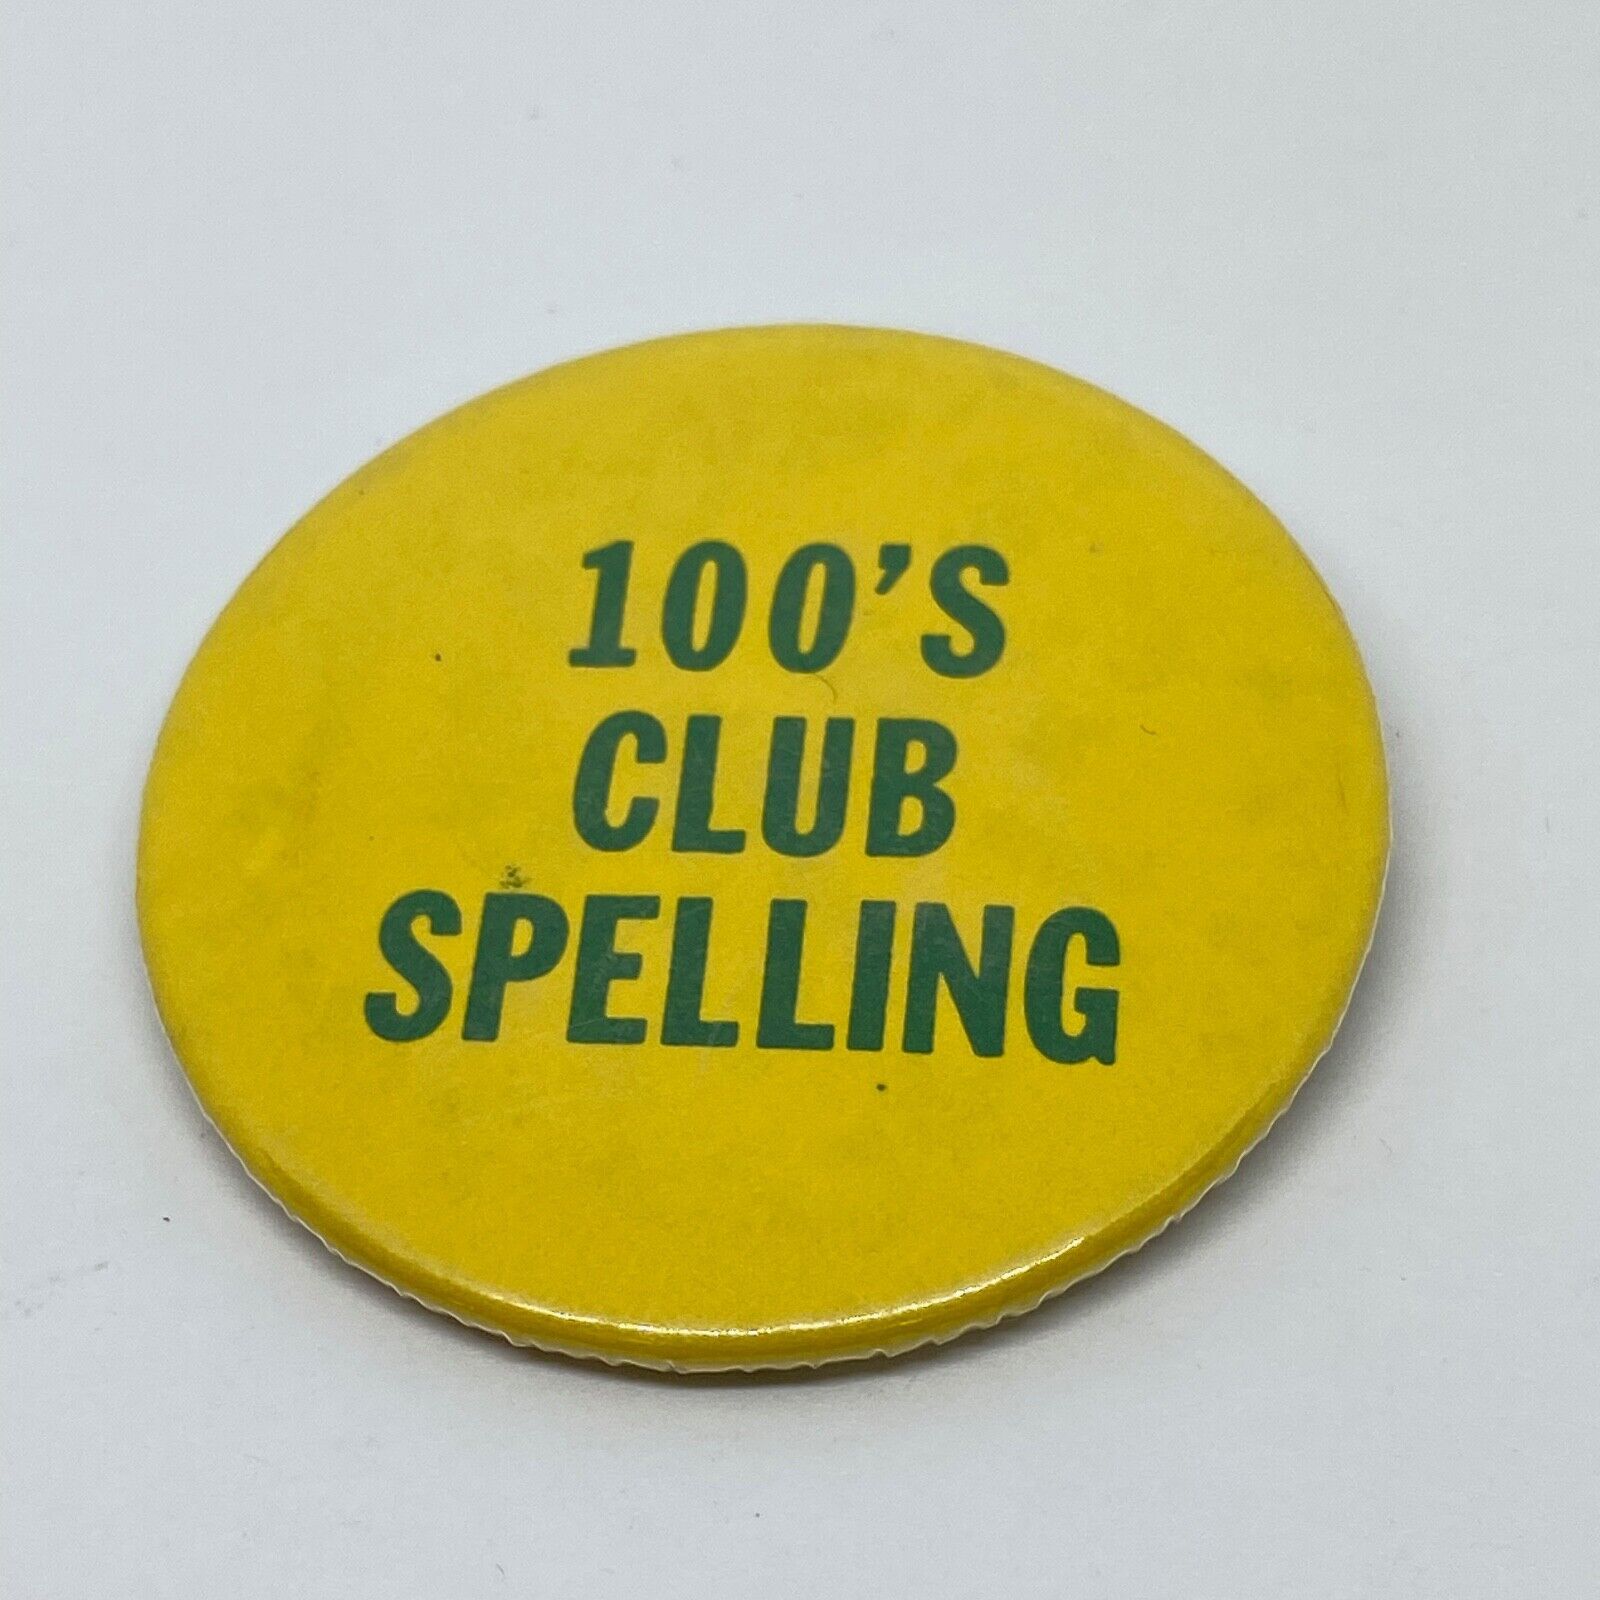 Vintage 100's Club Spelling Button Pin